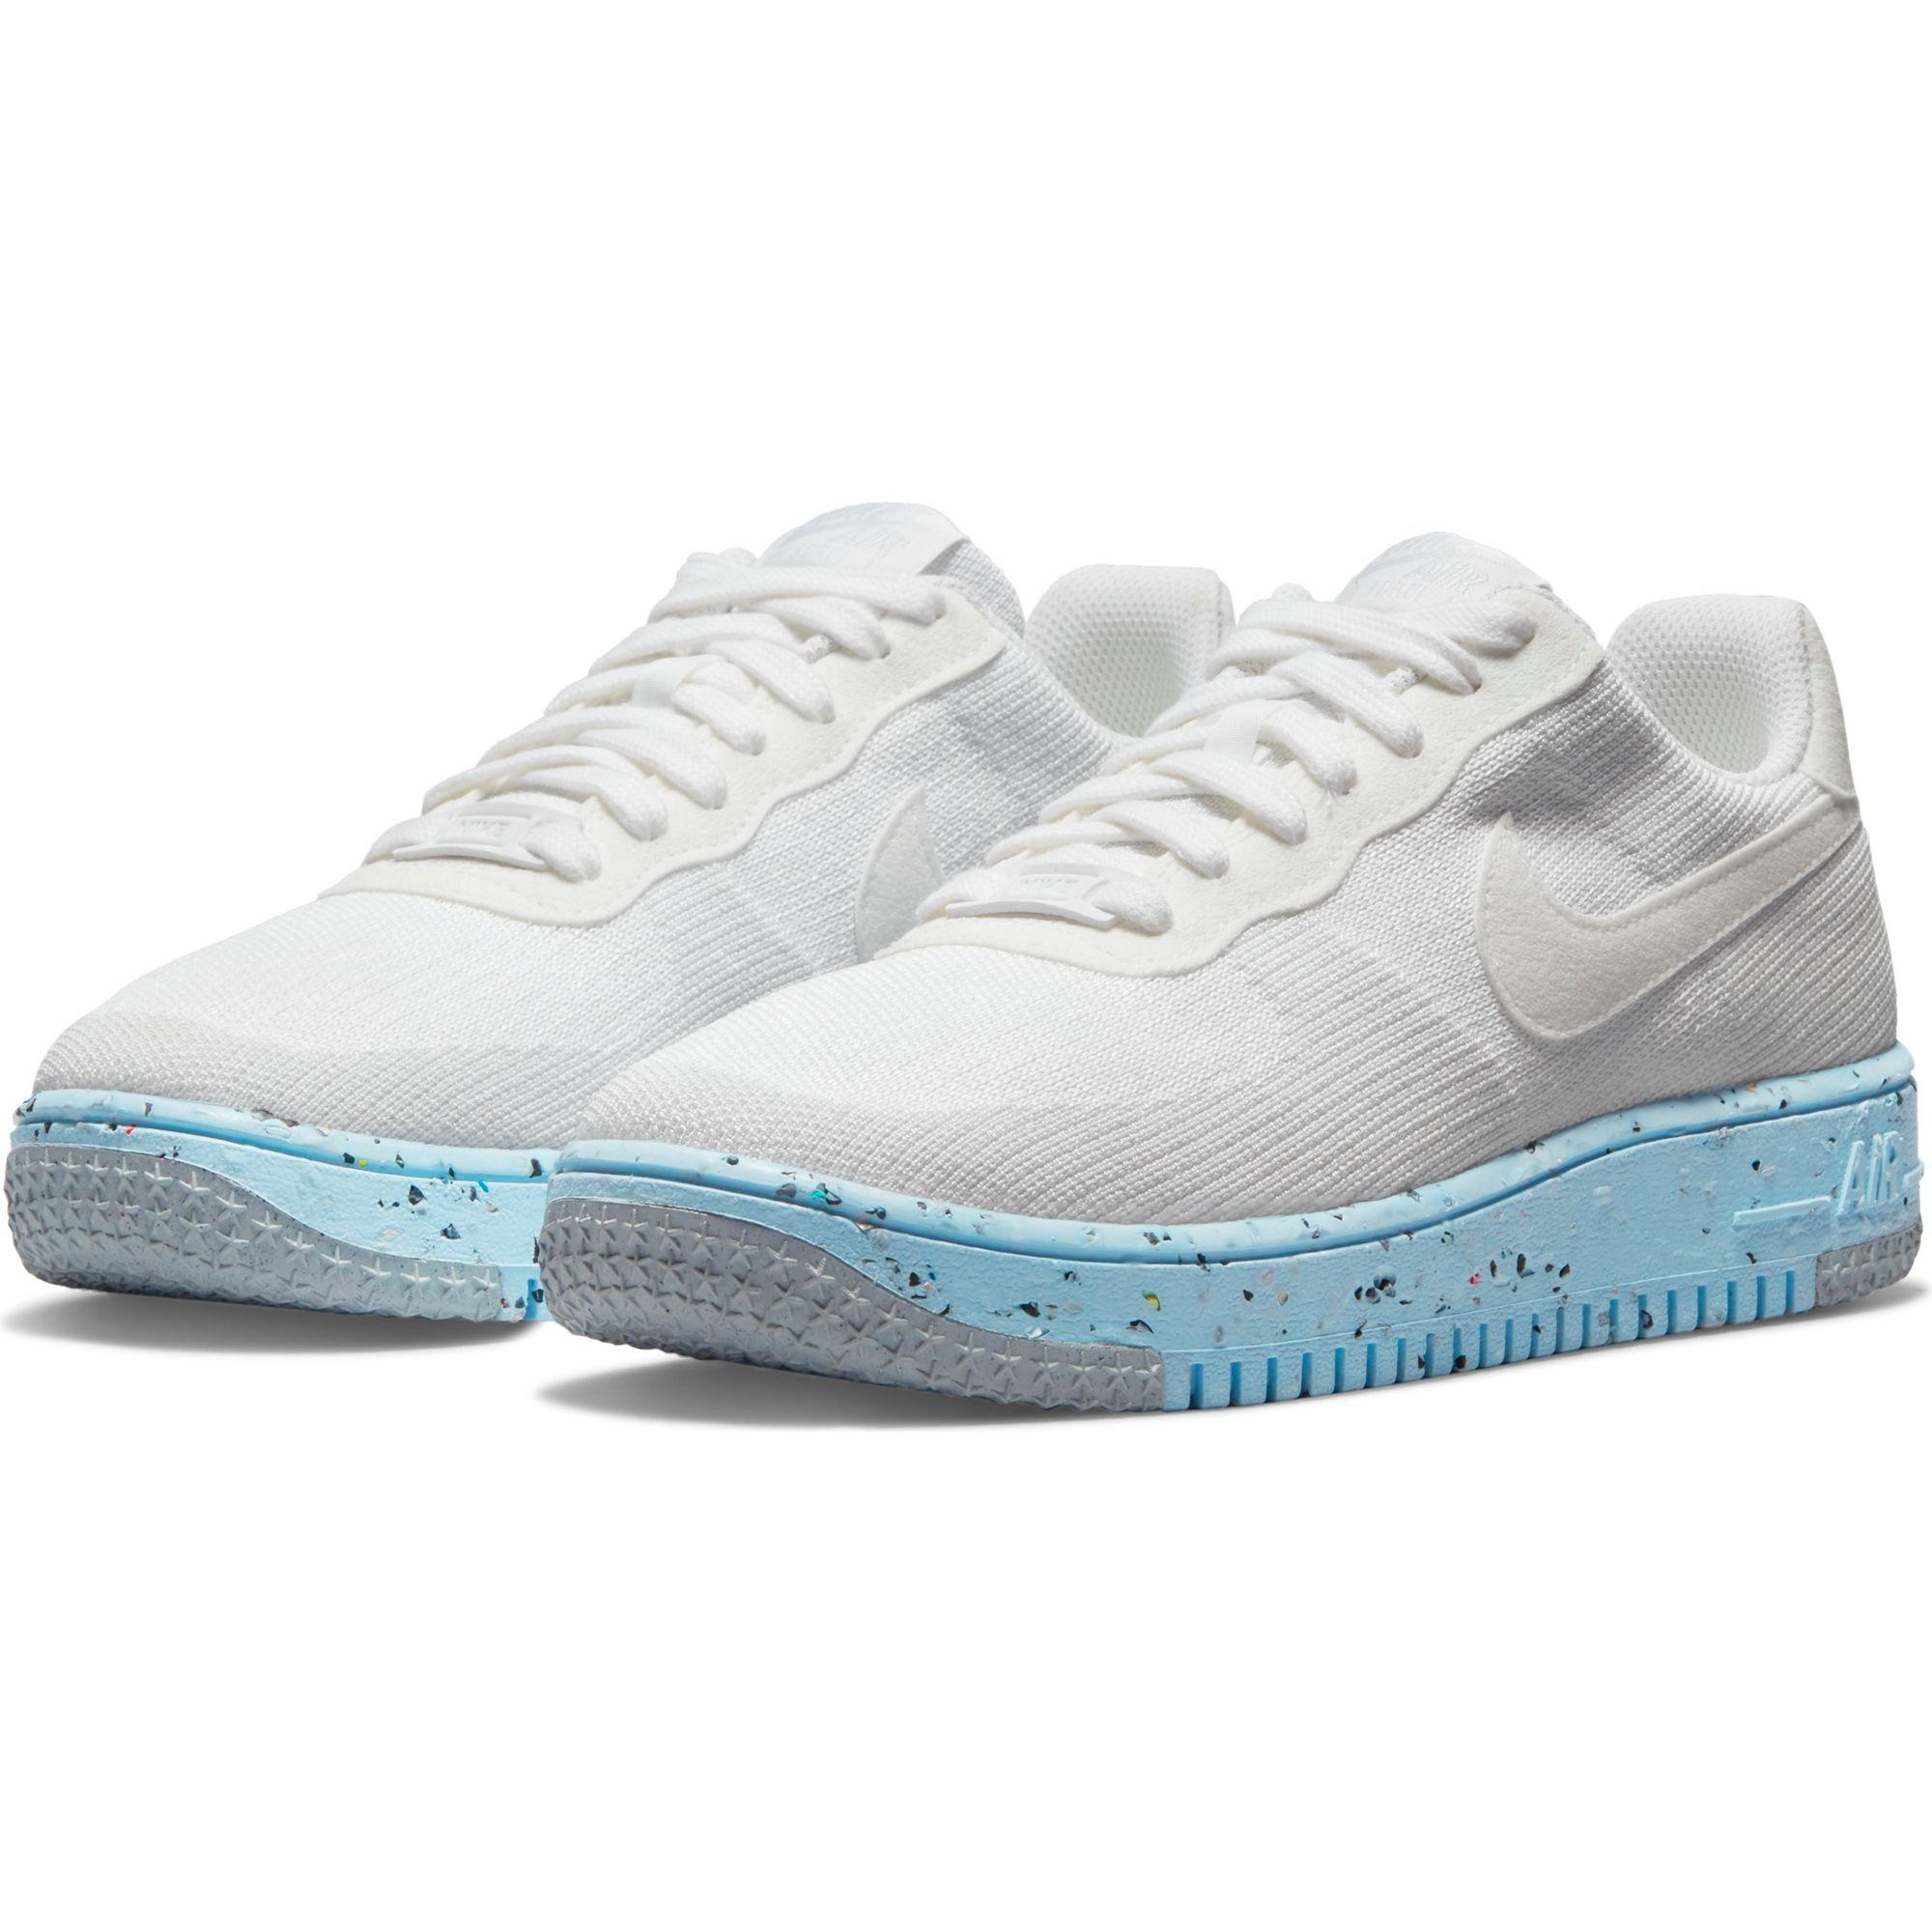 Nike Force 1 Crater FlyKnit "White/Pure Platinum" Women's Shoe